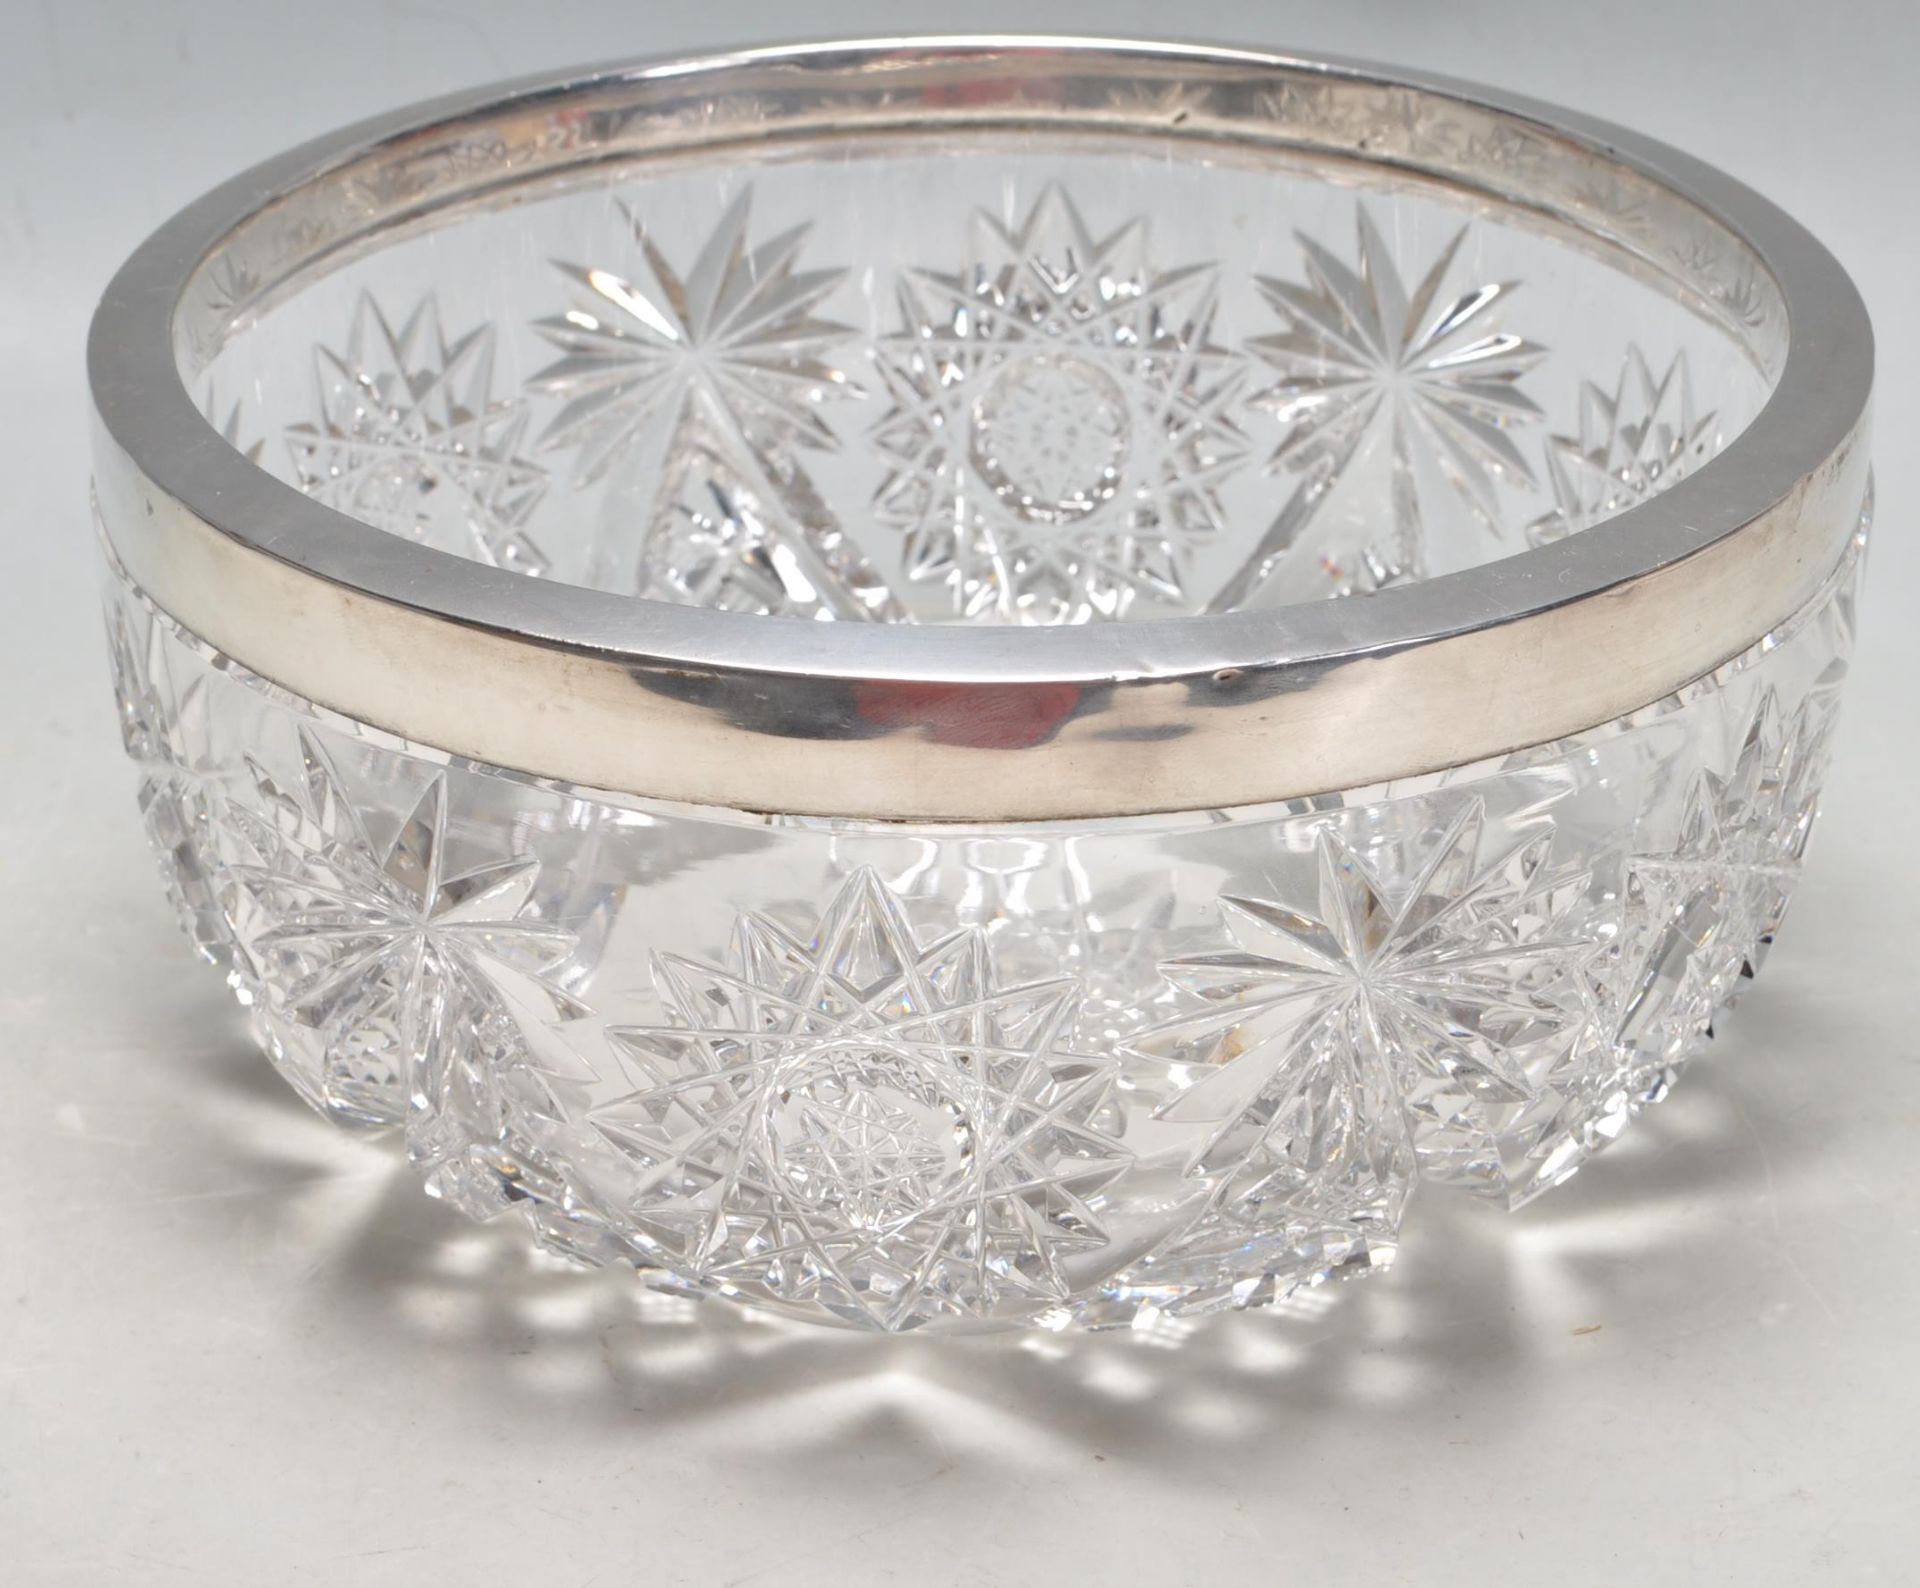 1922 BIRMINGHAM SILVER AND CUT GLASS FRUIT BOWL BY JOHN GRINSELL & SONS